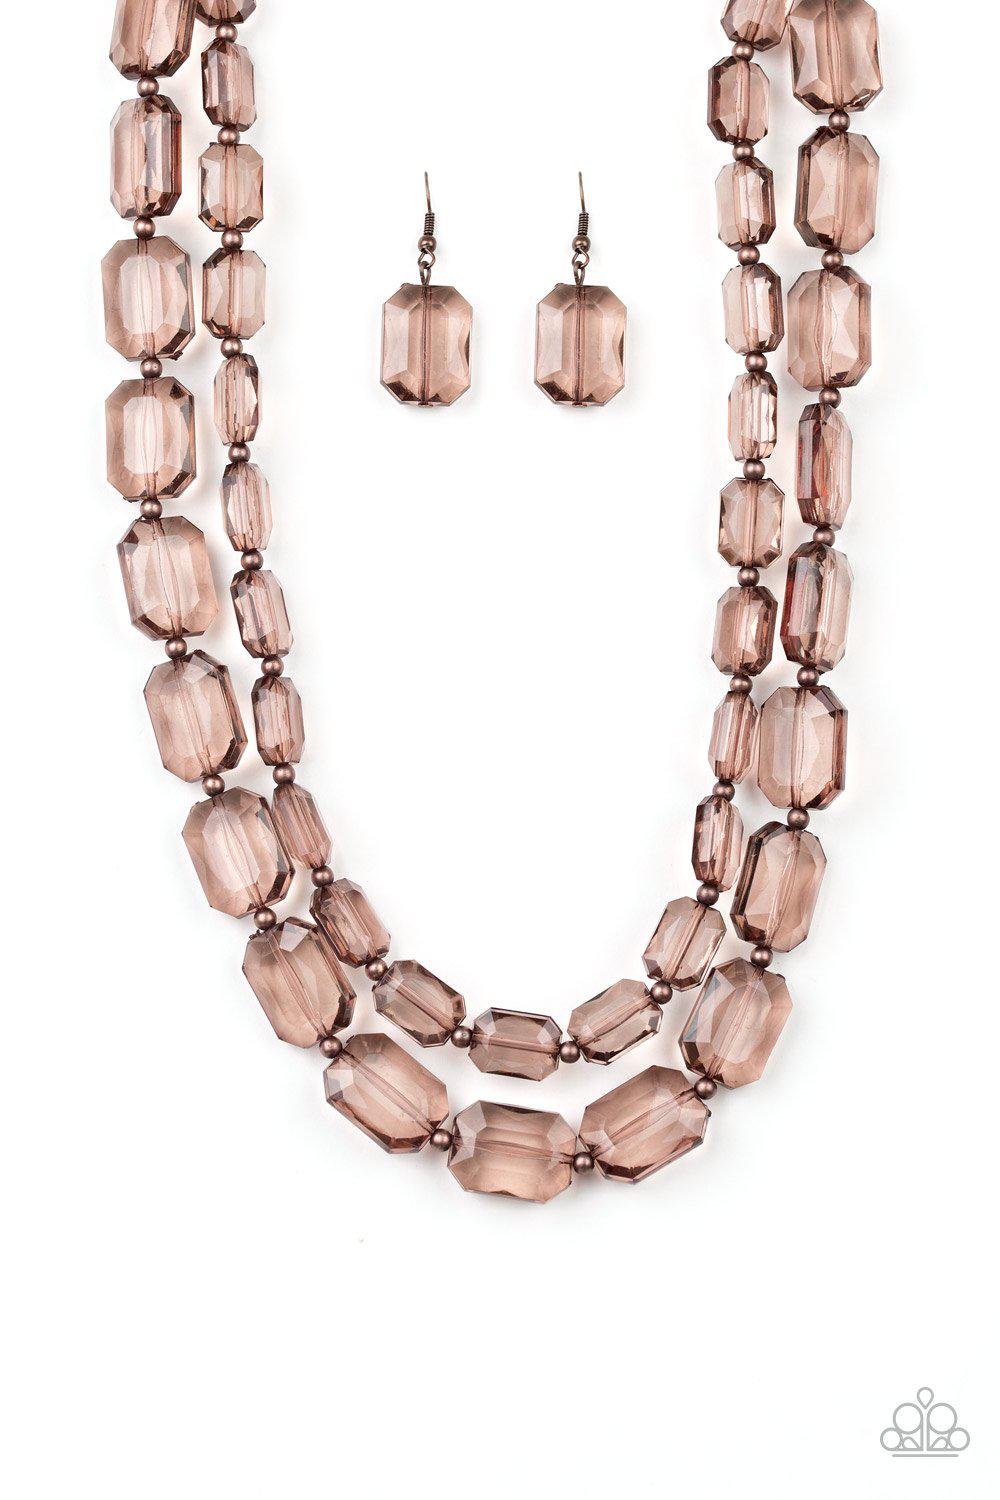 Ice Bank Copper Acrylic Necklace and matching Earrings - Paparazzi Accessories-CarasShop.com - $5 Jewelry by Cara Jewels